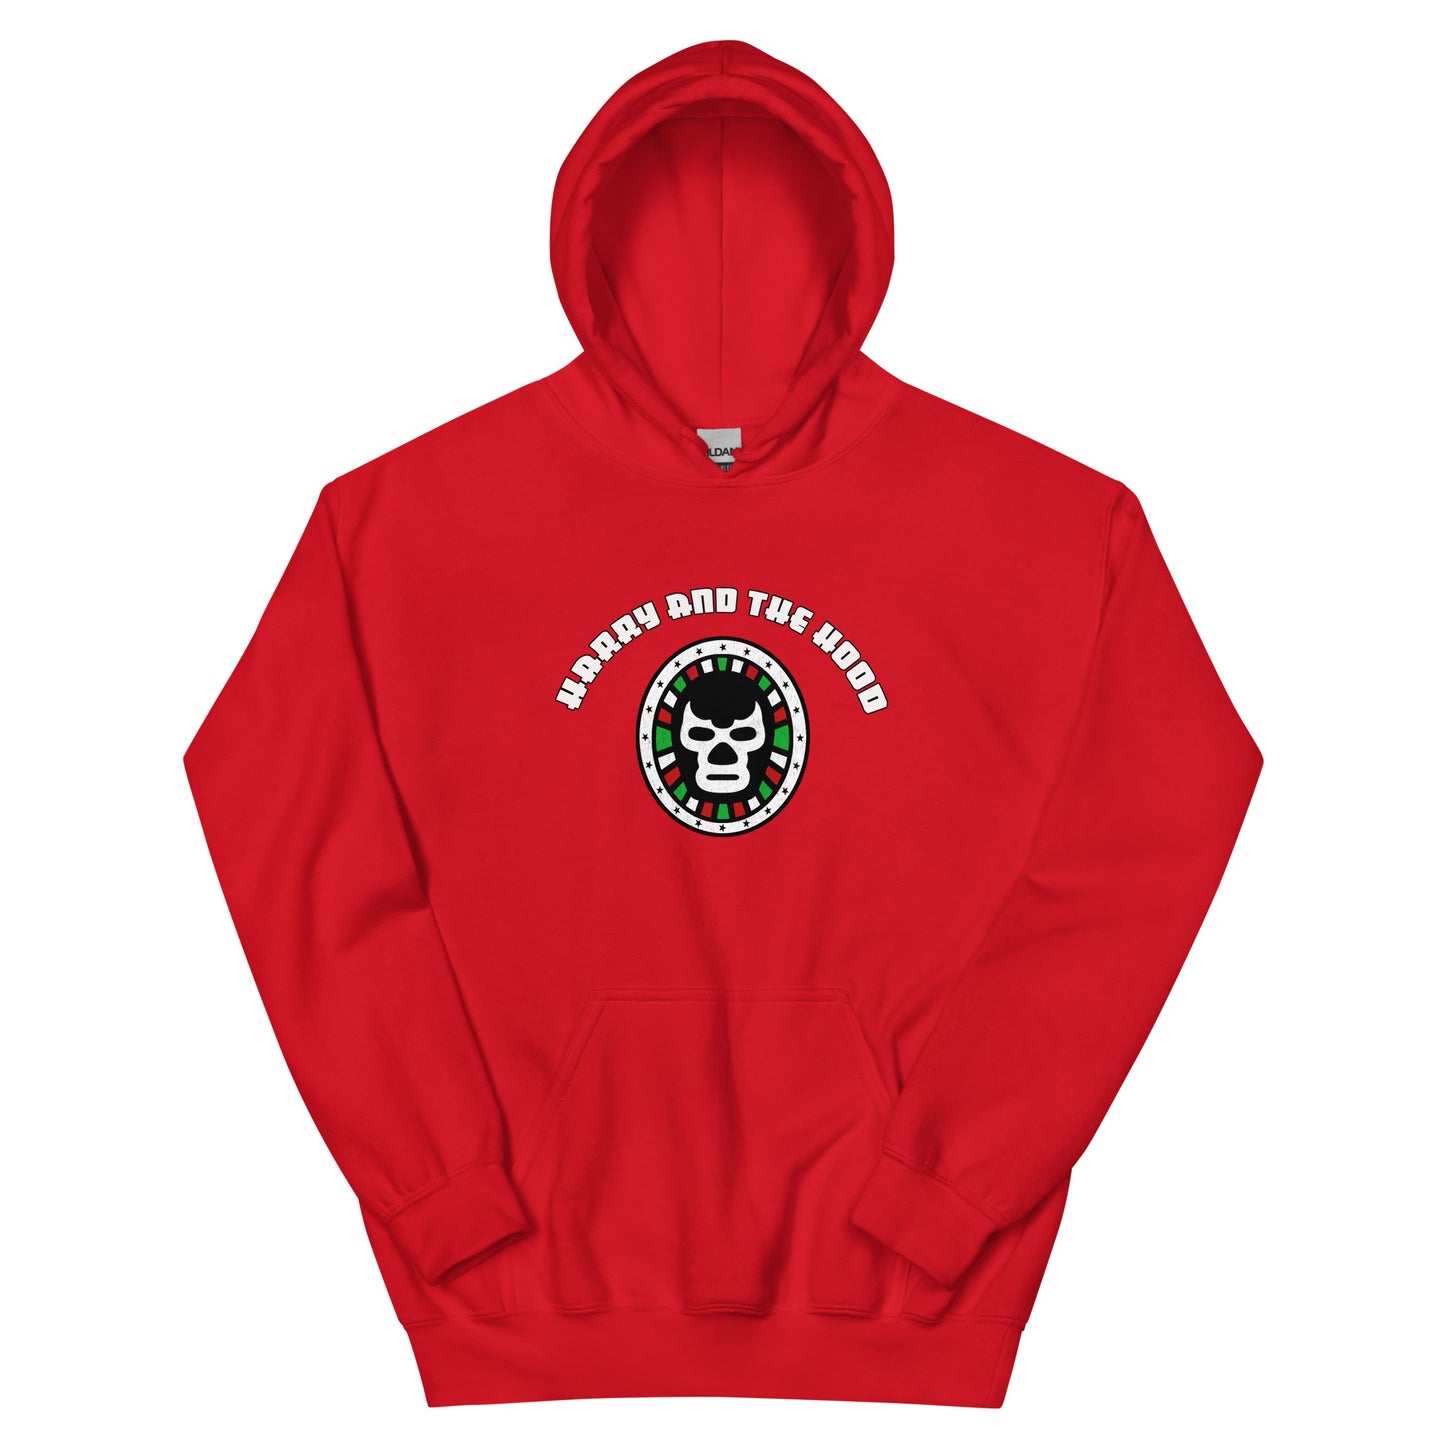 Harry and The Hood Lucha Libre Unisex Hoodie